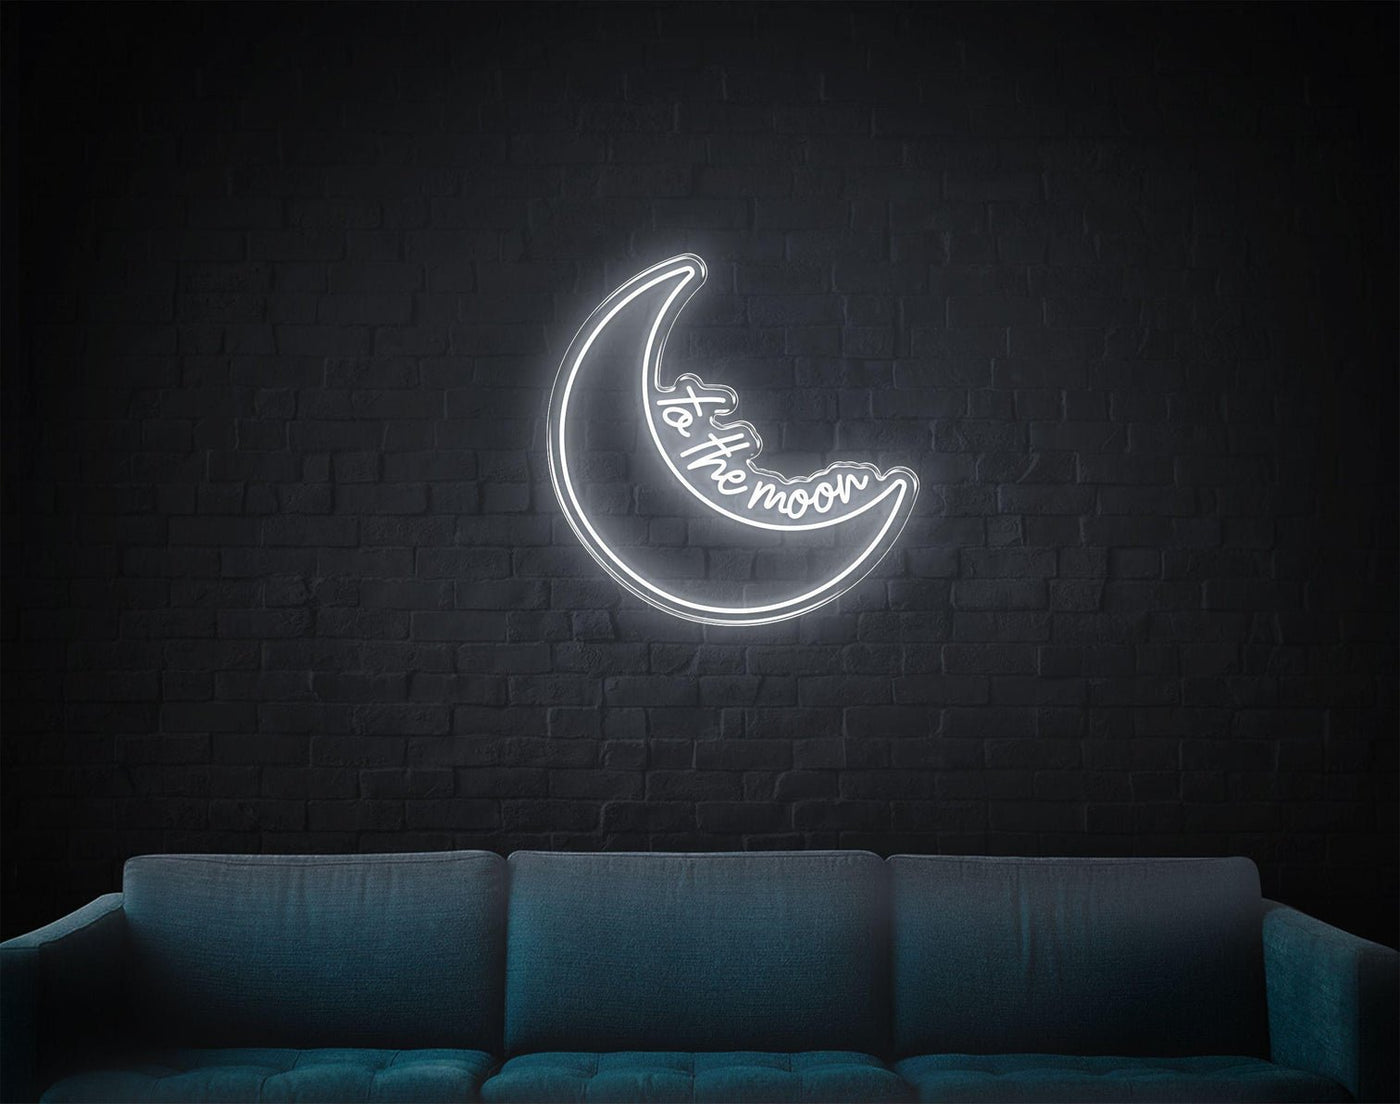 To The Moon LED neon sign - 30inch x 30inchTurquoise